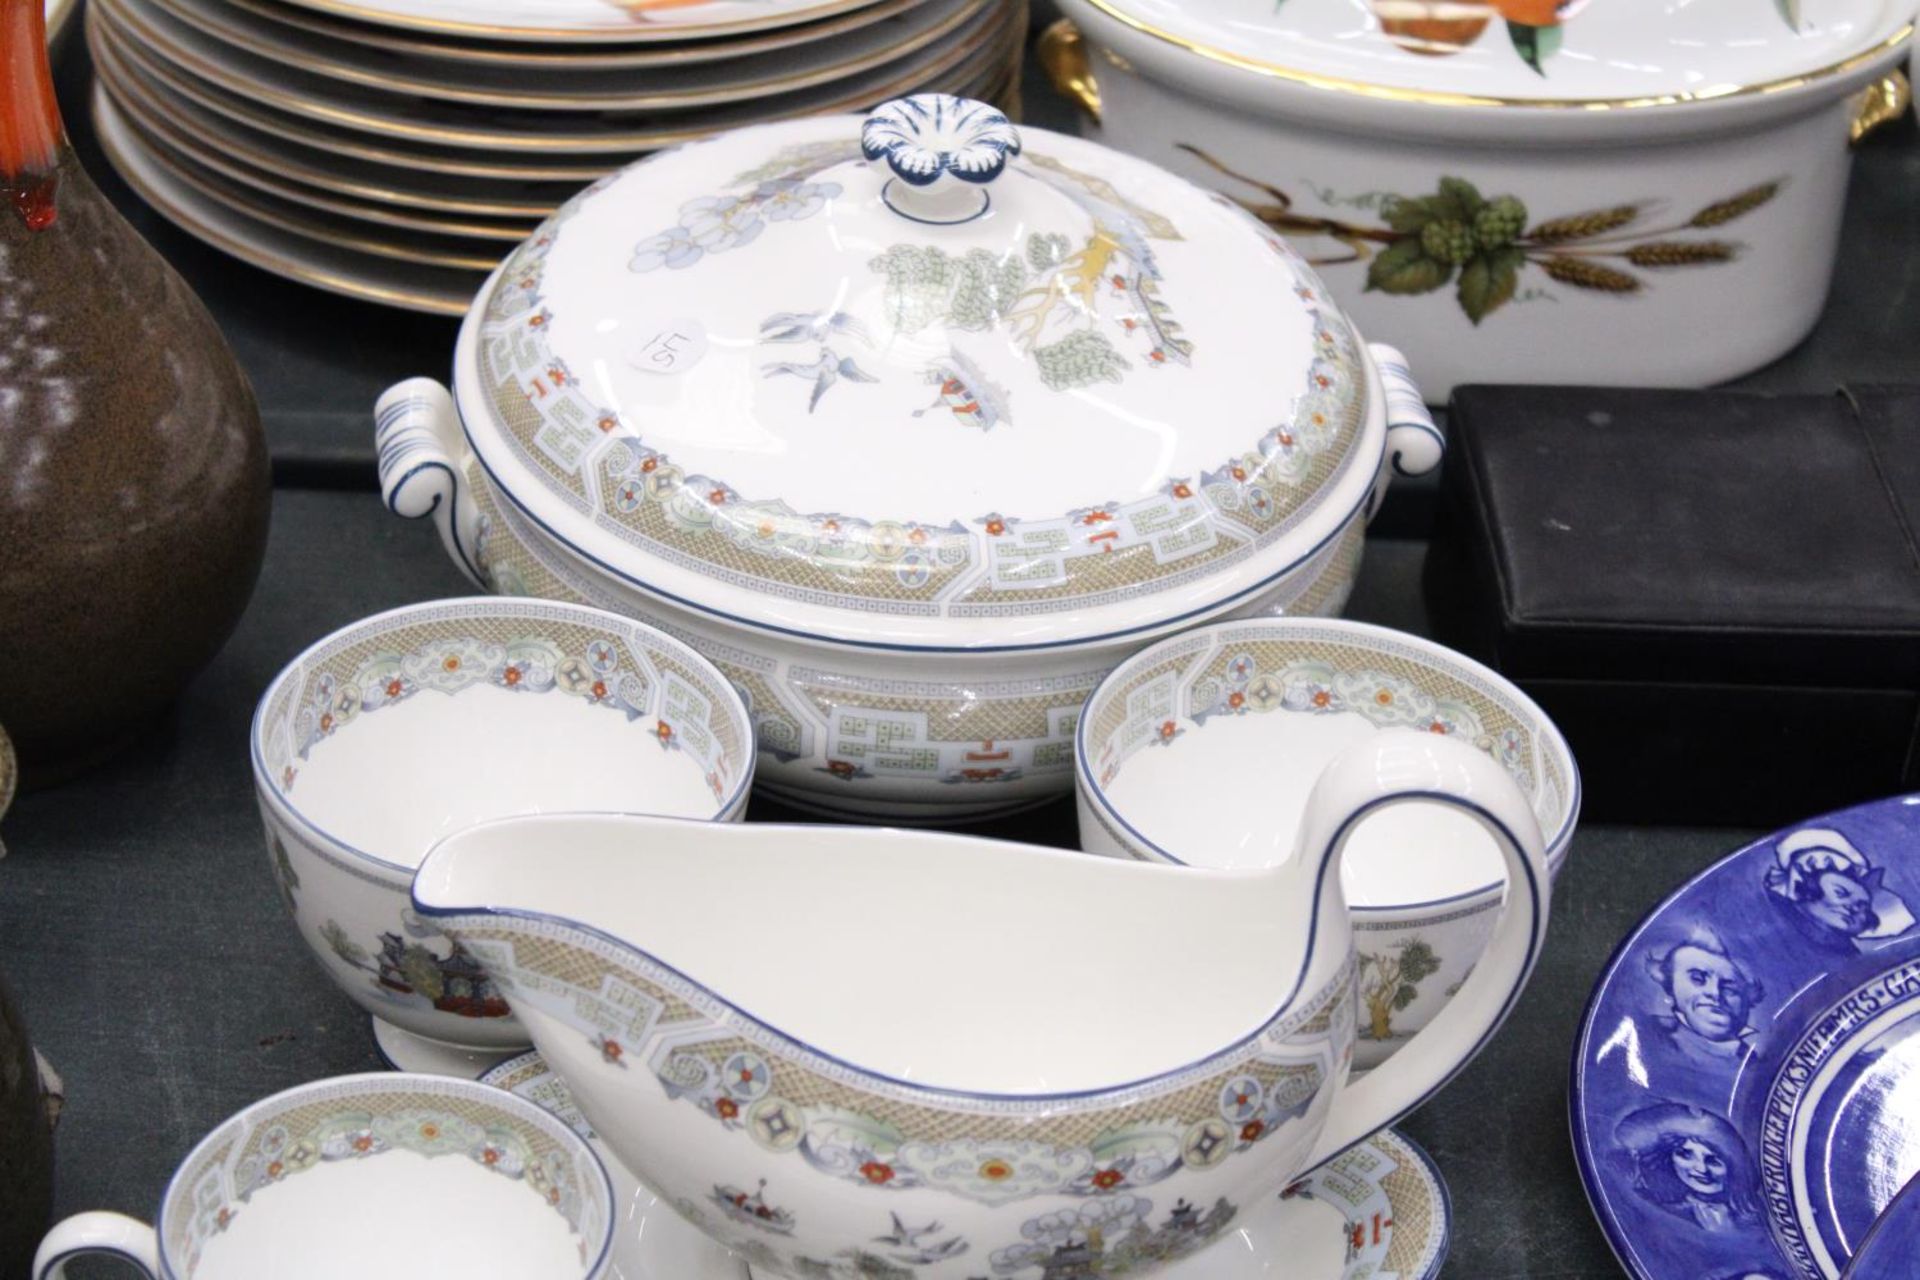 A PART ORIENTAL STYLE WEDGWOOD DINNER SERVICE TO INCLUDE A GRAVY JUG, CUP, PLATES ETC - Image 2 of 6